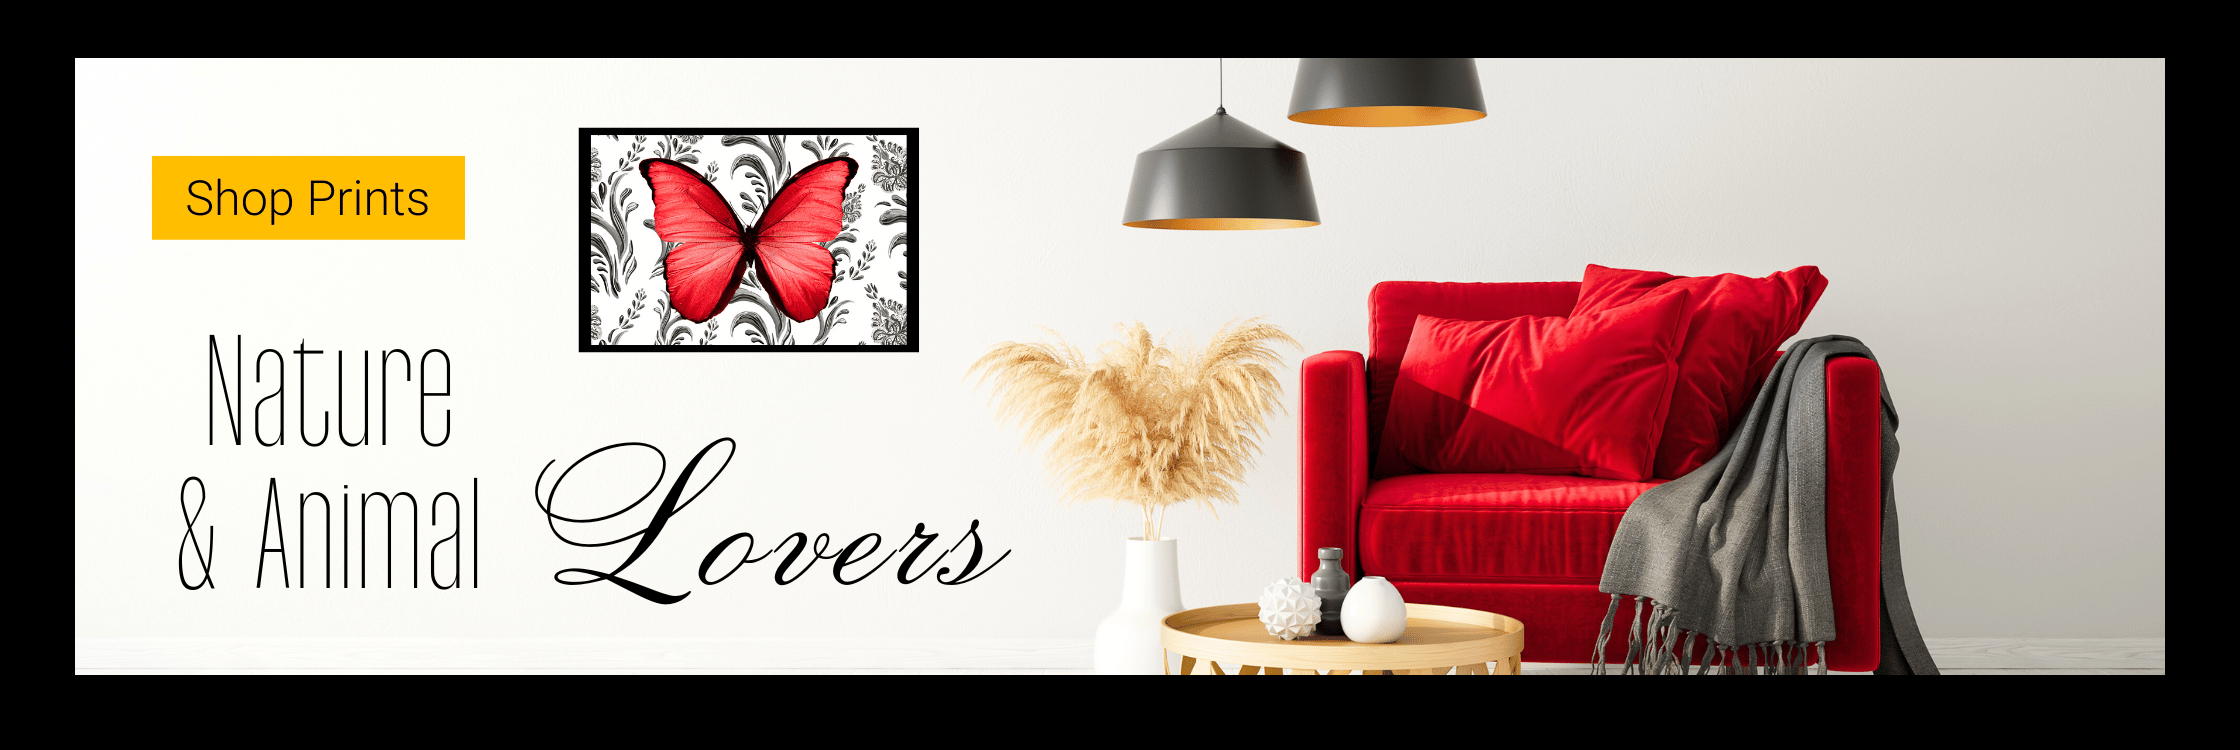 link to nature and animal prints, nature and animal lovers text with red butterfly print on wall